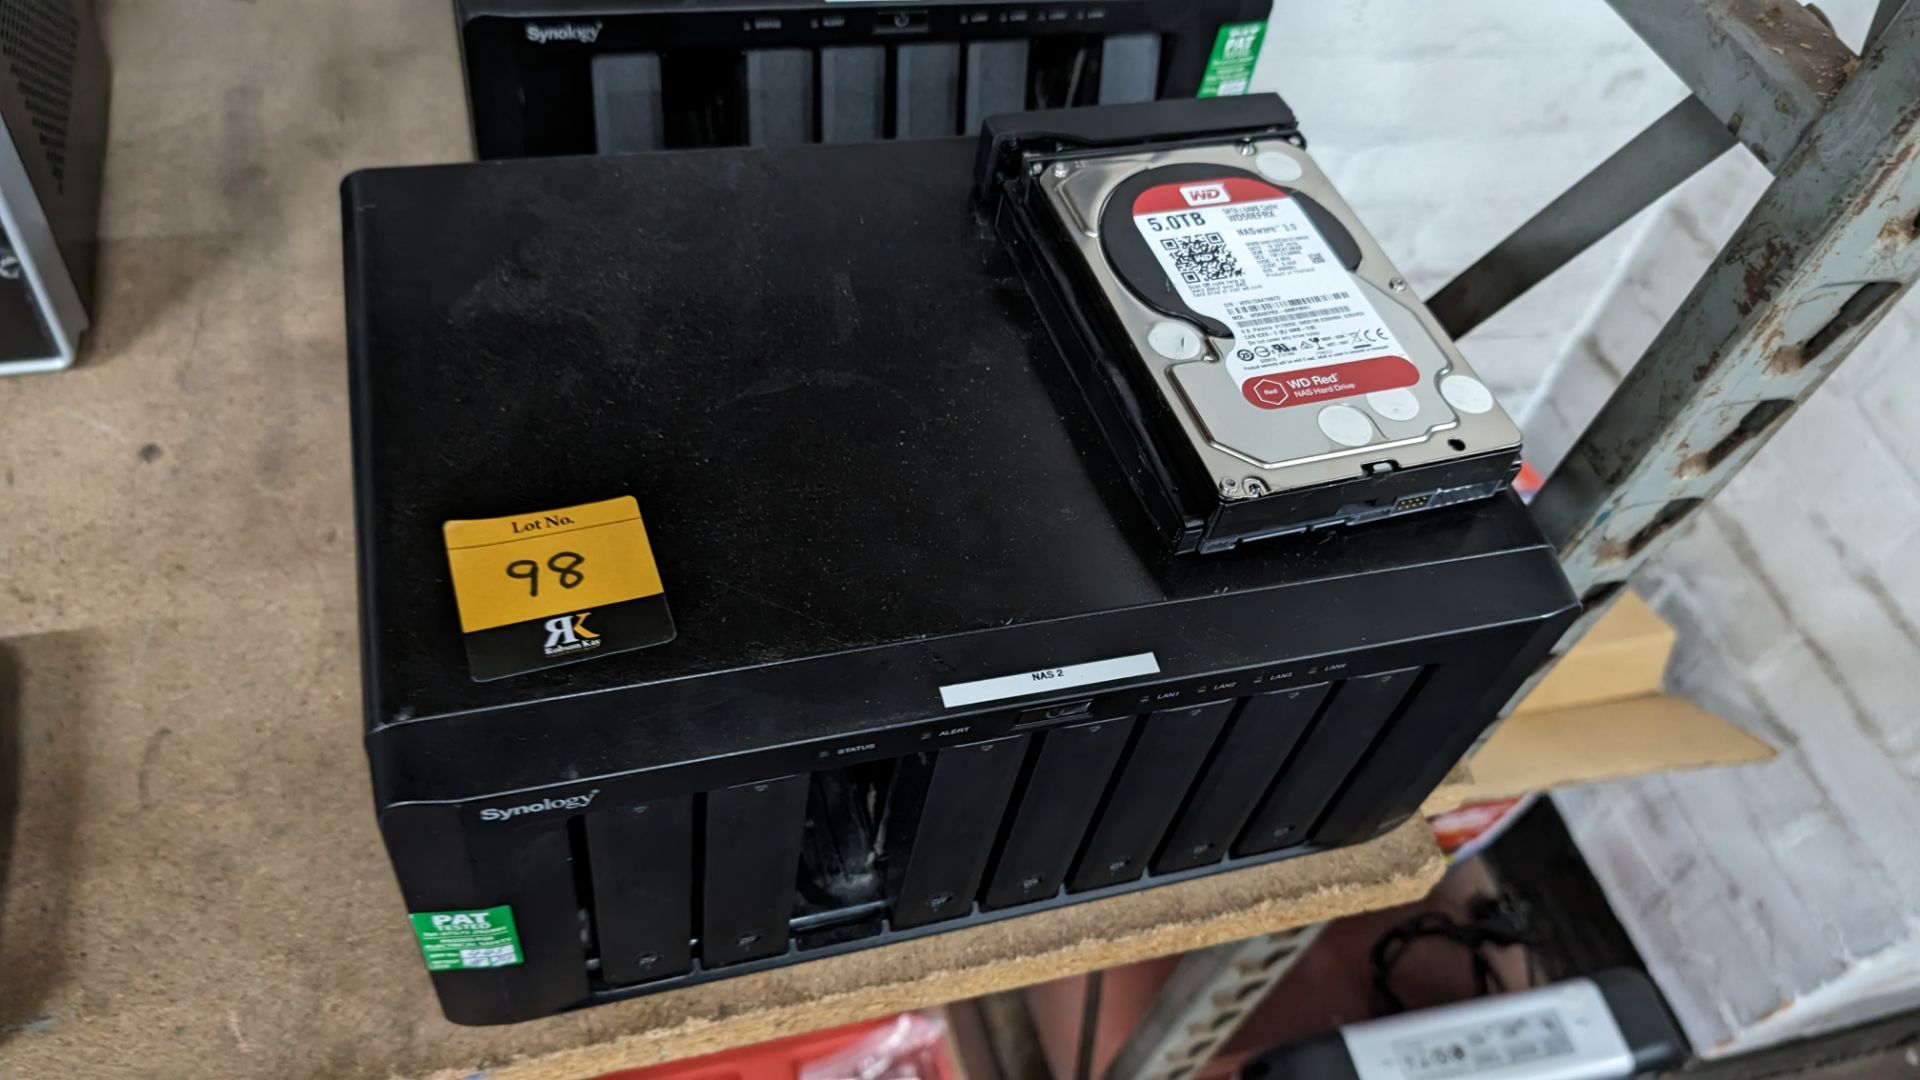 NAS drive with 8 x 5TB hard drives - Image 2 of 15